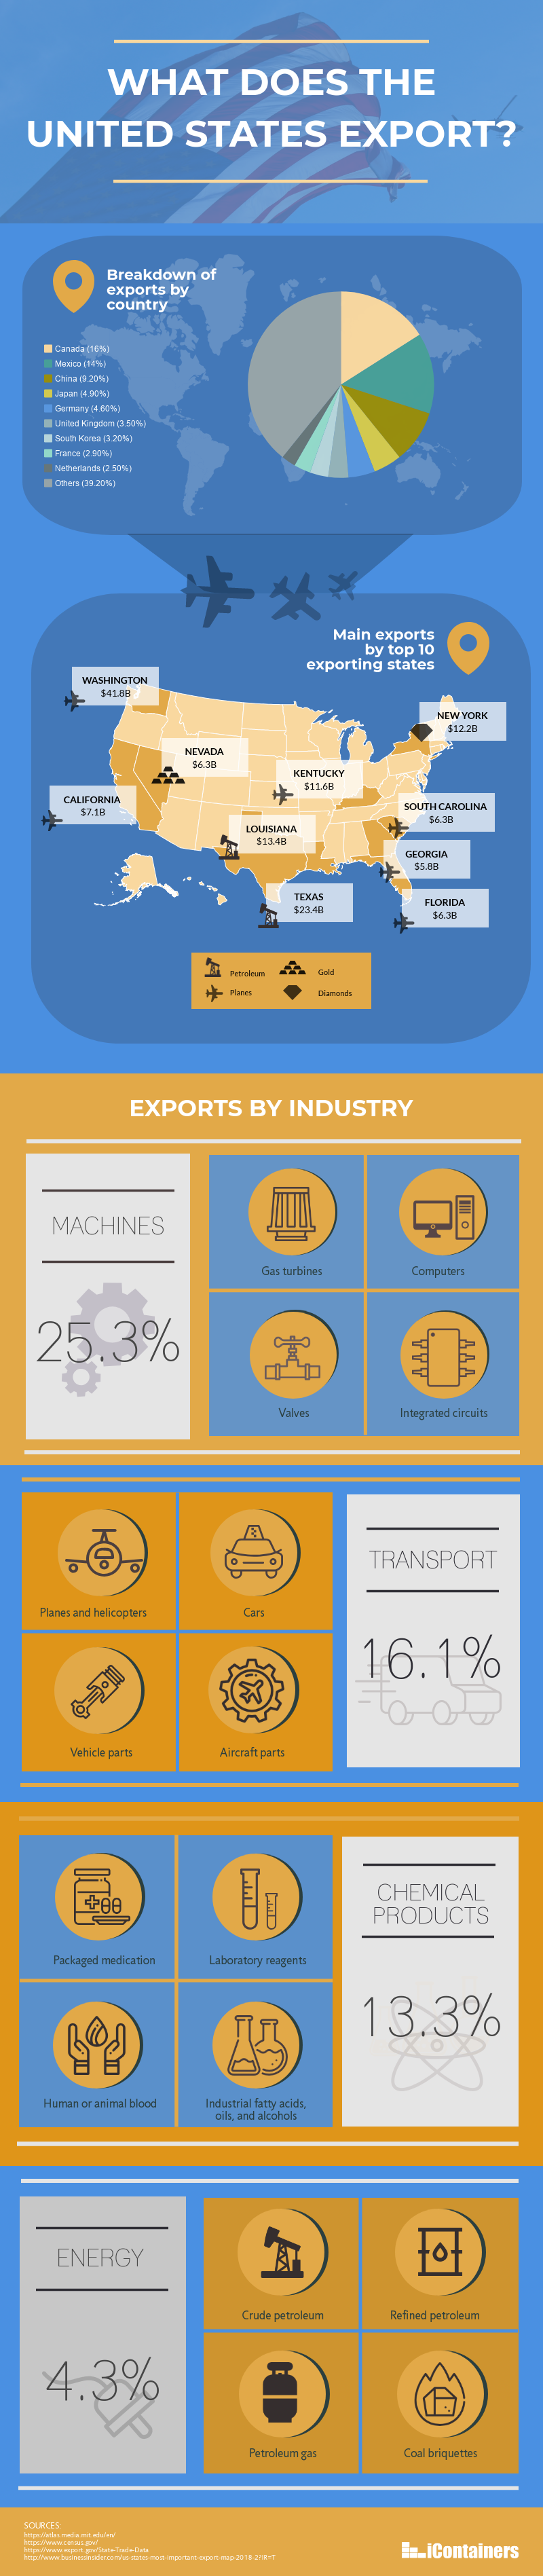 what-does-the-us-export-infographic.png